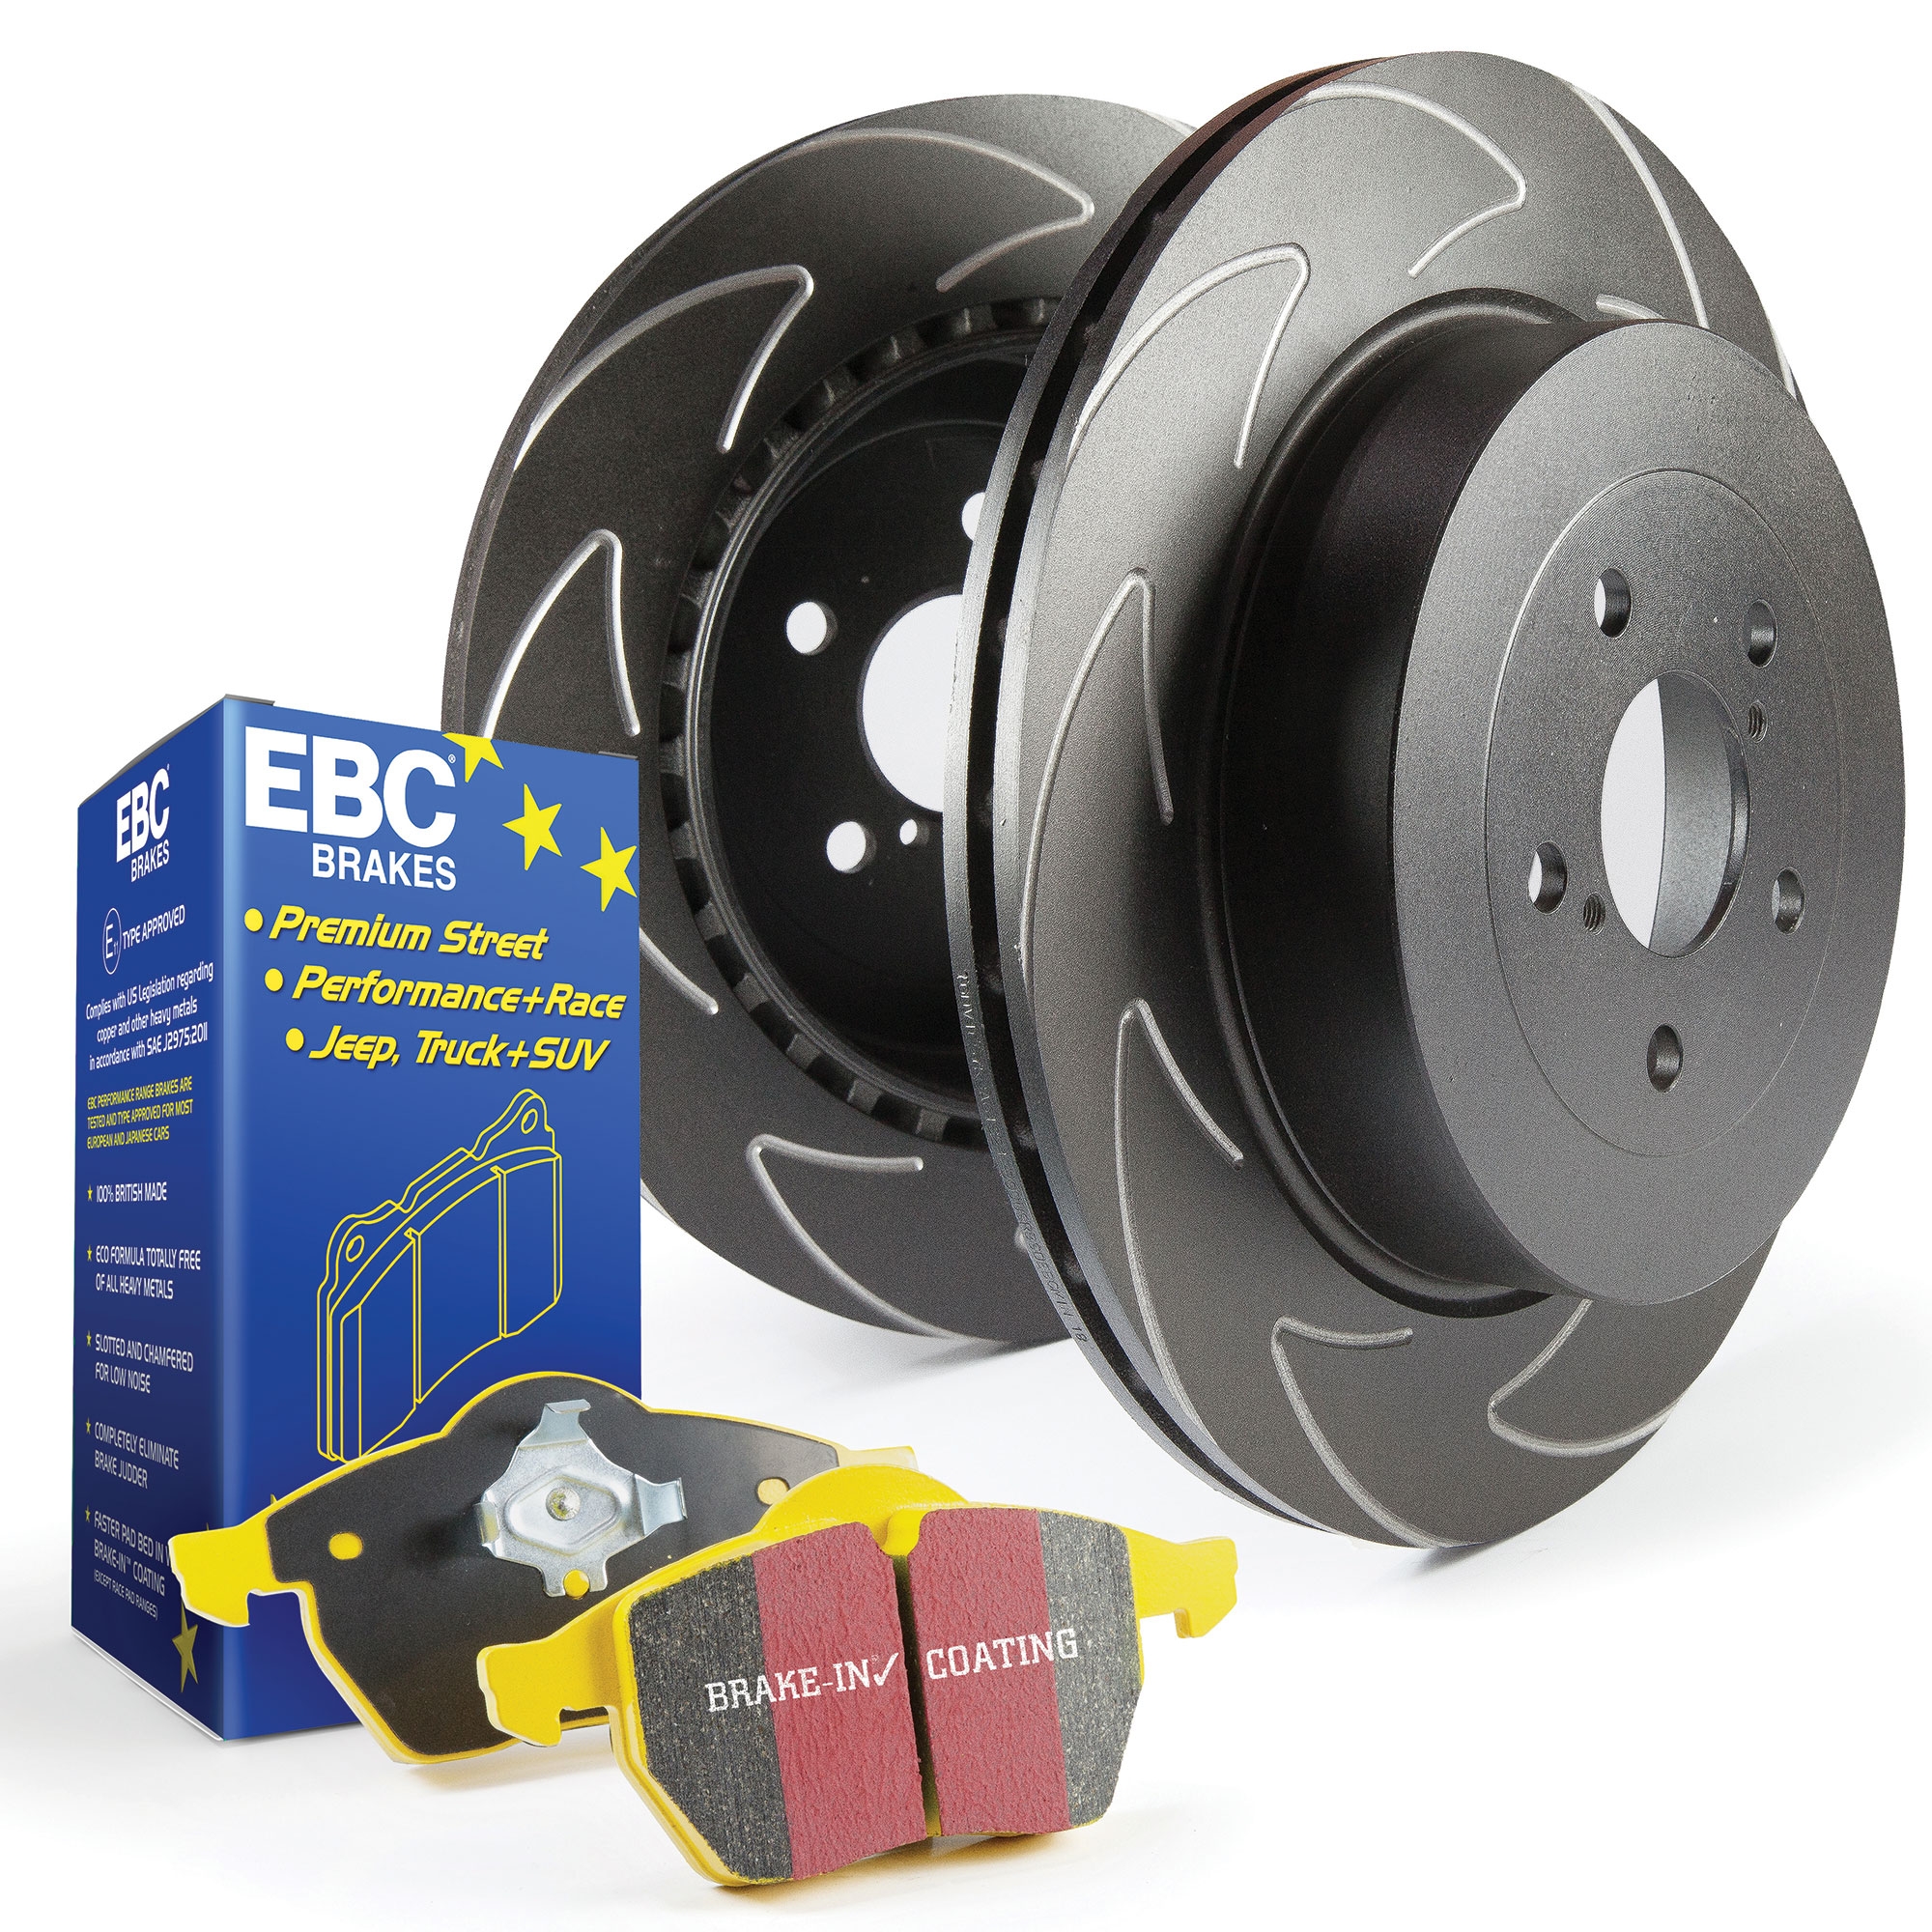 EBC Front BSD Brake Discs & Yellowstuff Pads Kit For Ford